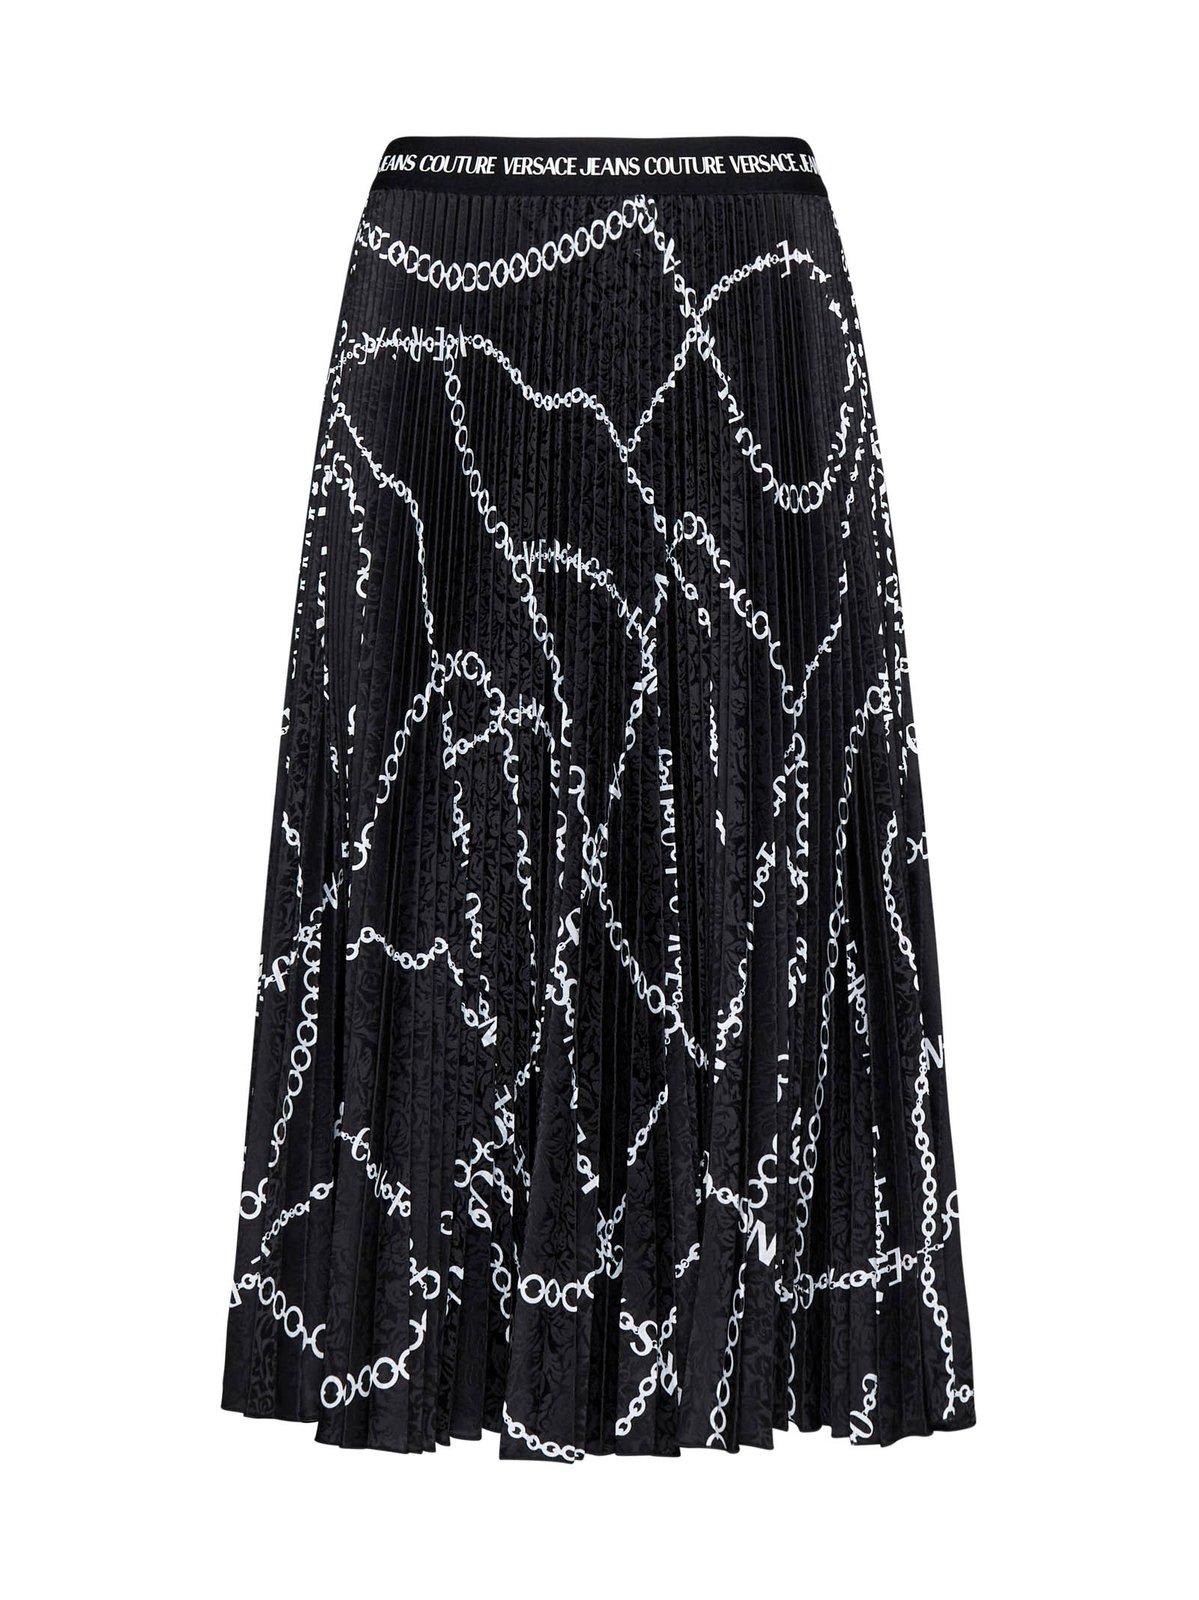 VERSACE JEANS COUTURE CHAIN-LINK PLEATED MIDI SKIRT